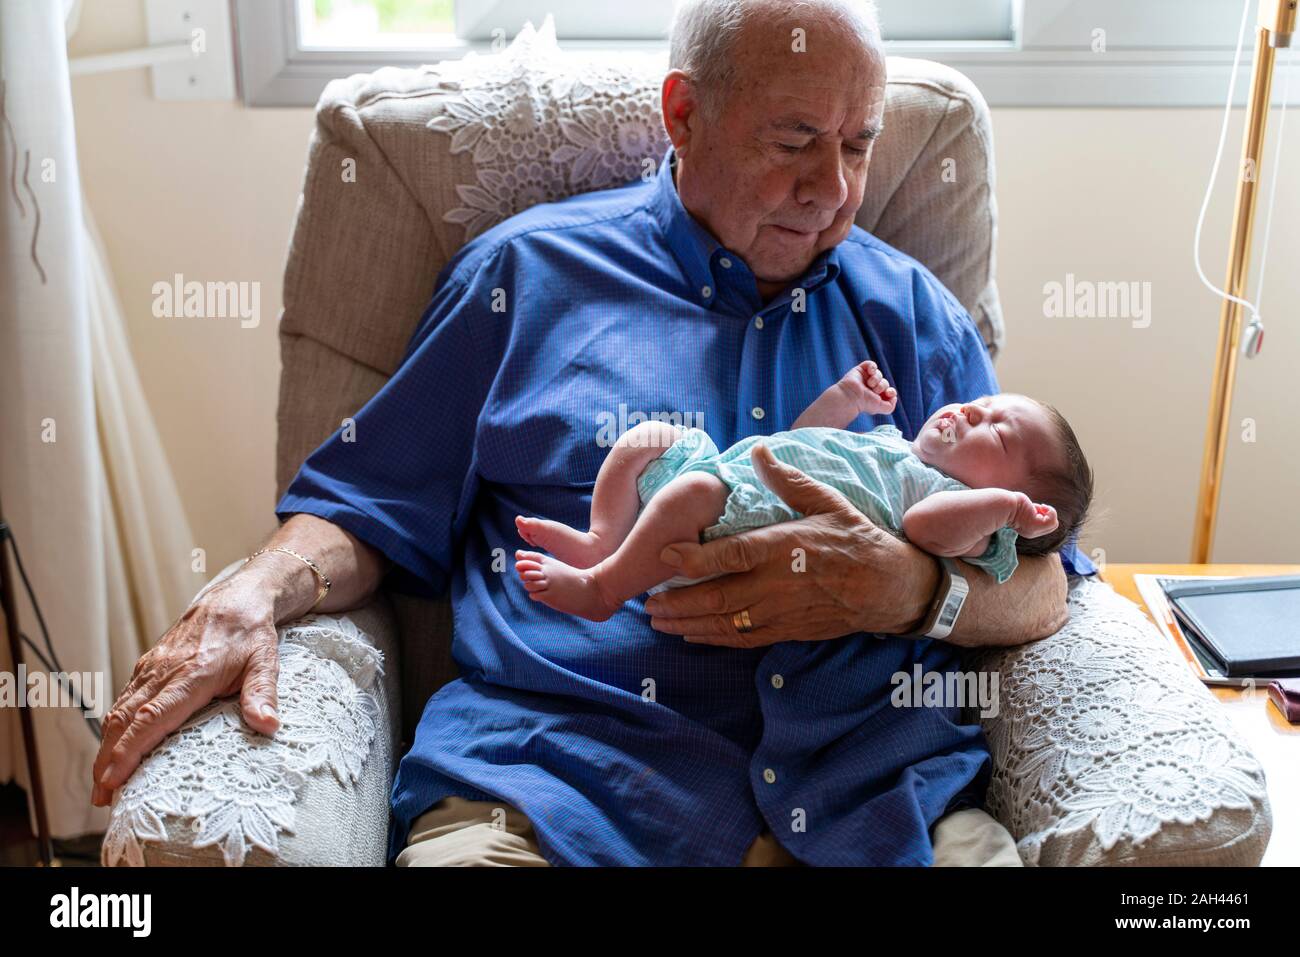 Grandfather sitting in an armchair holding a newborn baby Stock Photo